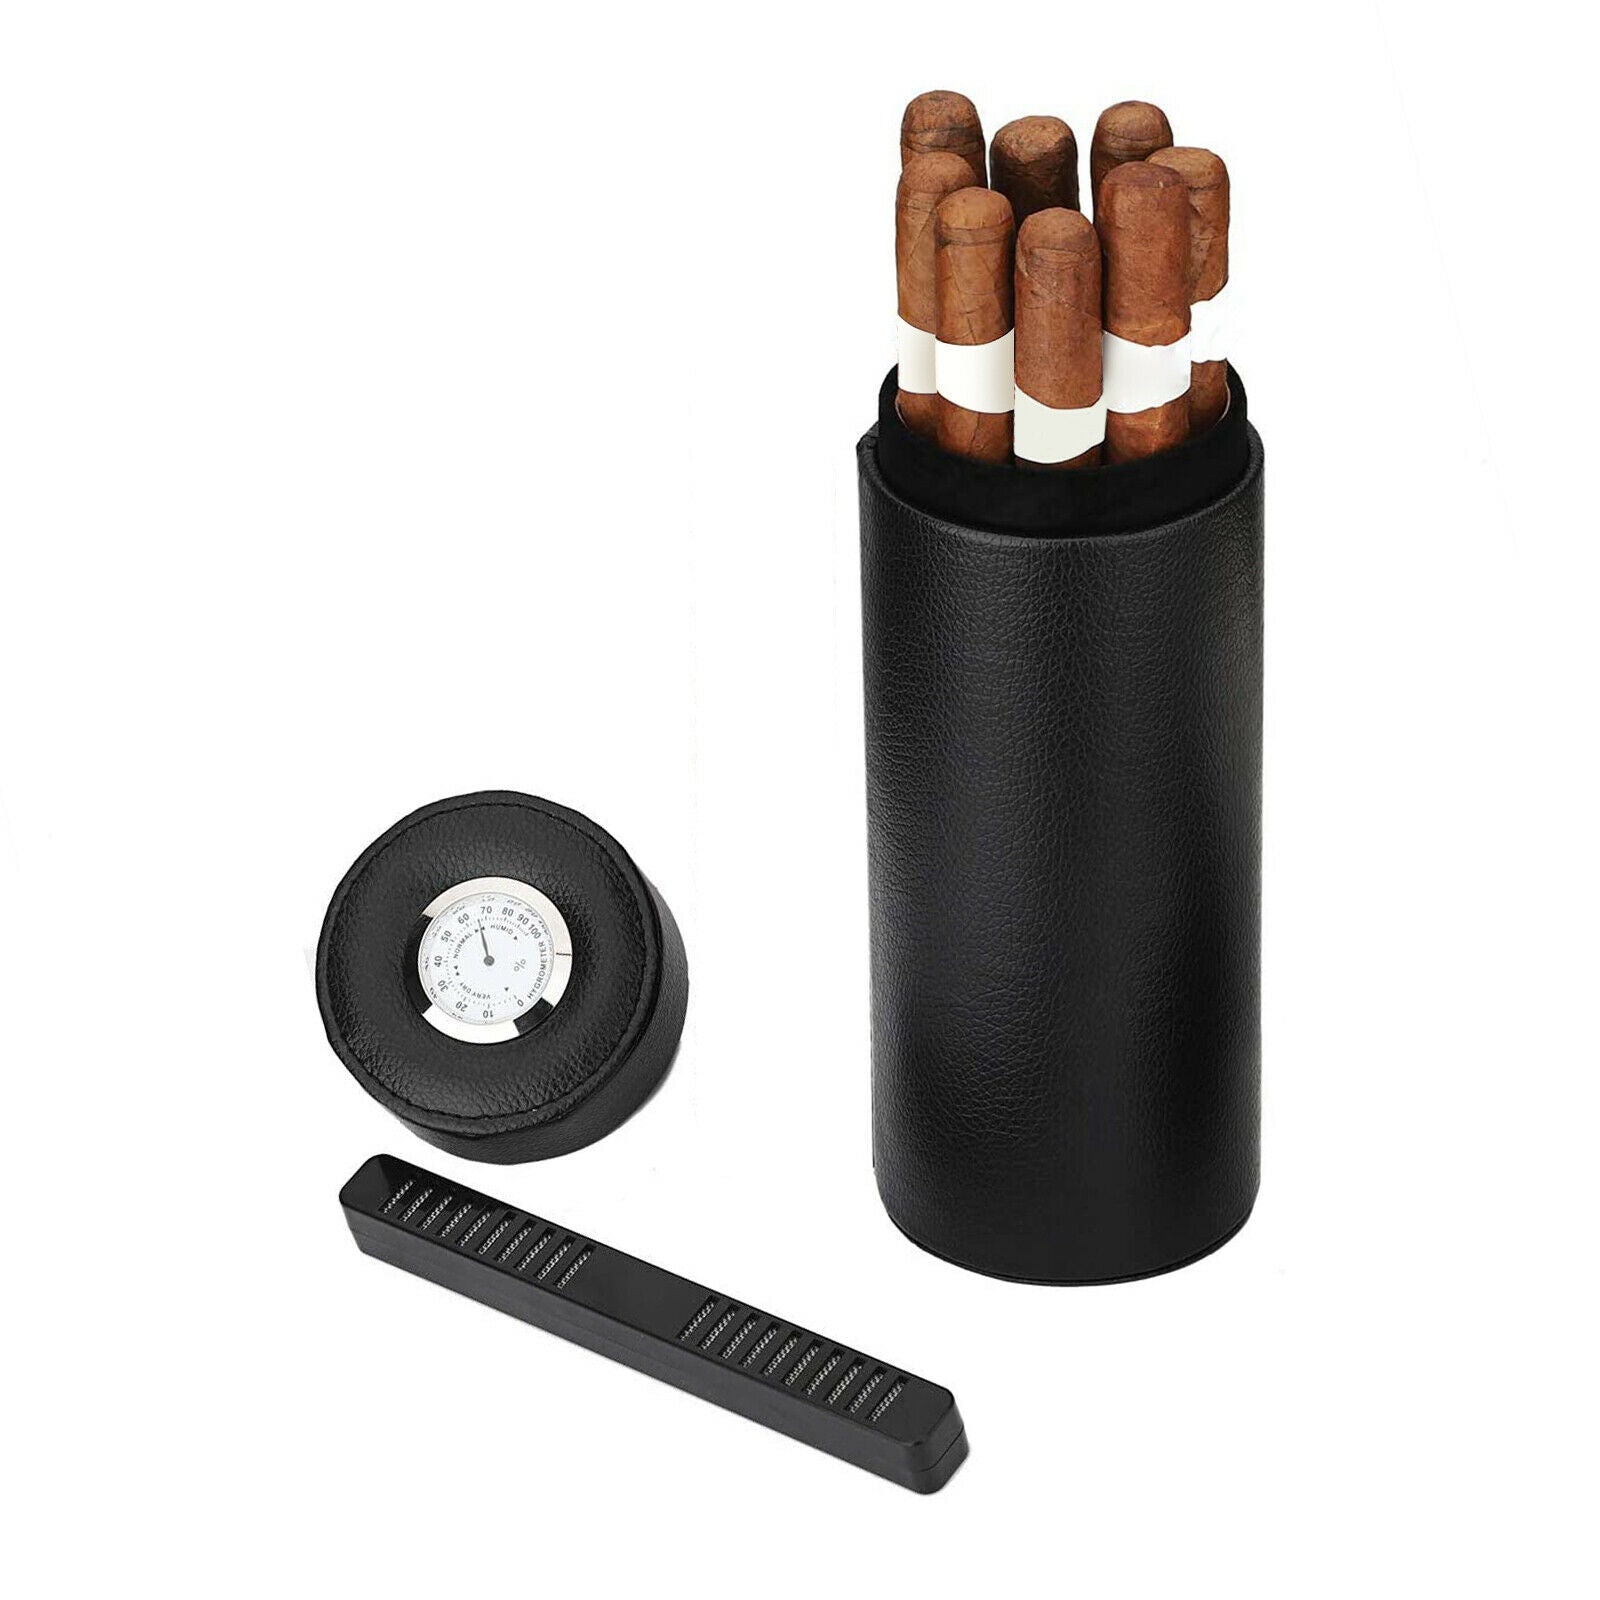 Portable Leather Cigar Humidor Hold 5-8 Cigars Carrying Holder Gift for Men